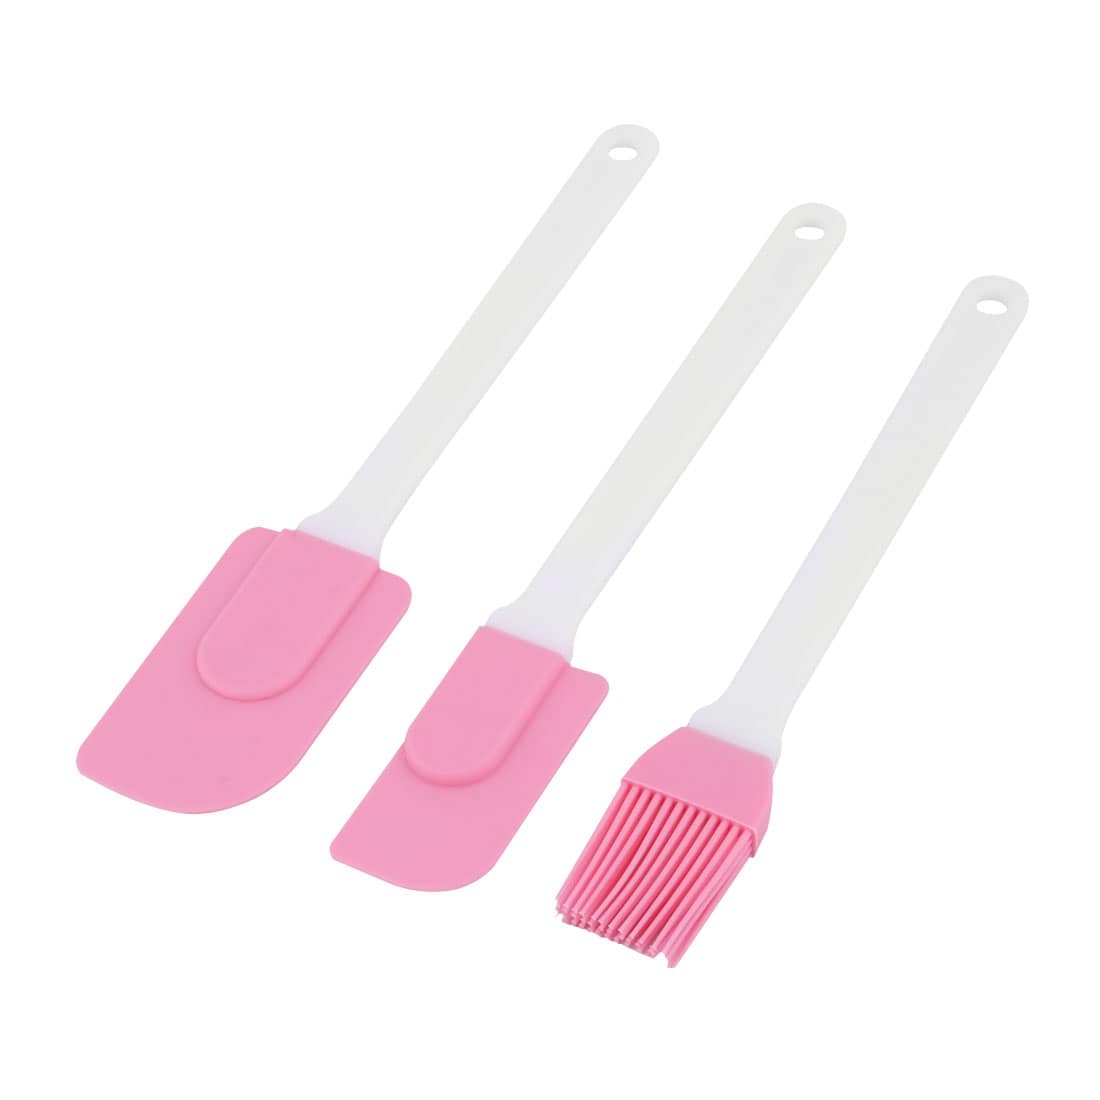 Uxcell Plastic Handle Kitchen Butter Cream Cake Pastry Scraper Brush 3 in 1 Pink White